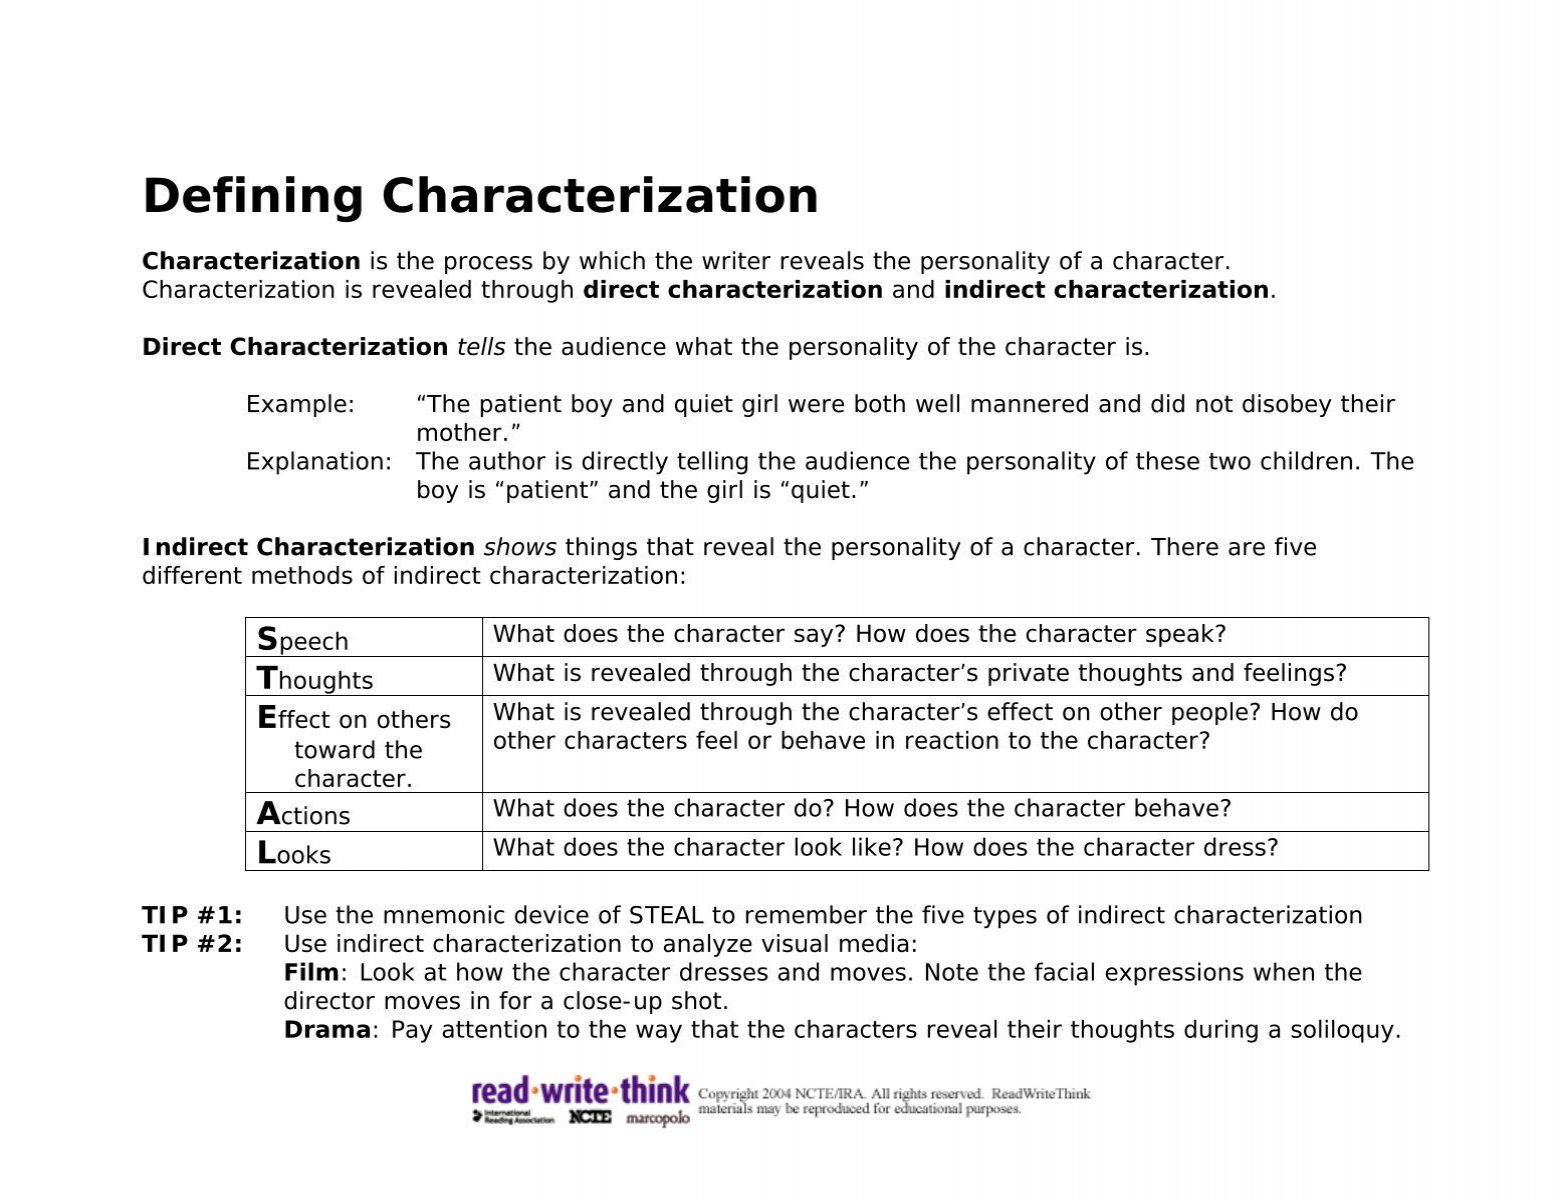 Defining Characterization Readwritethink